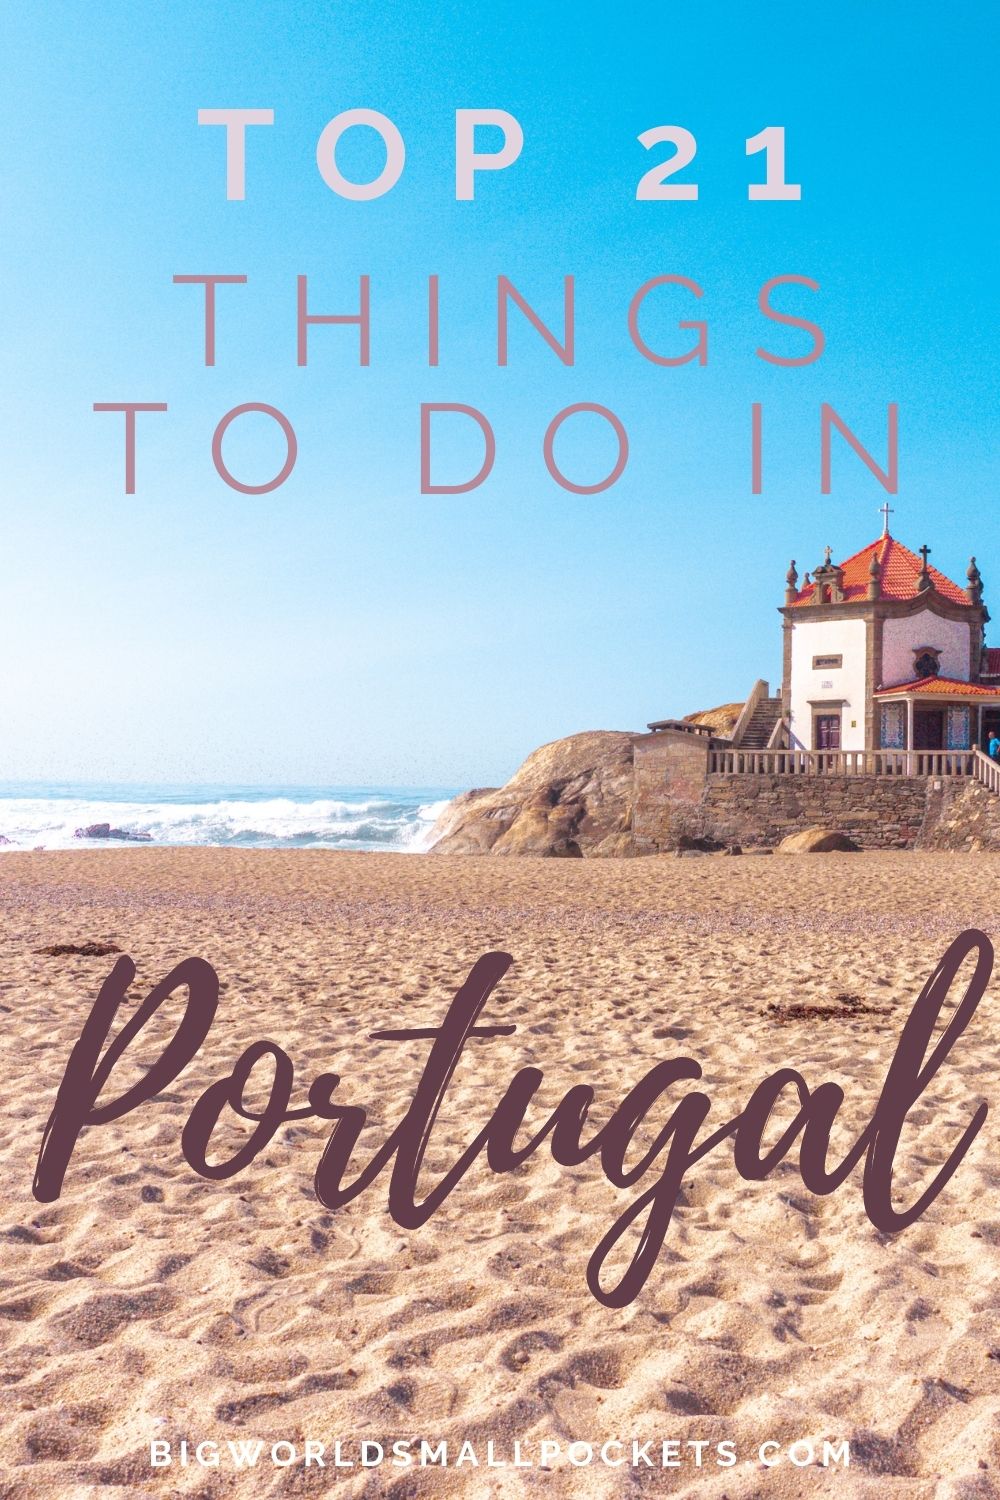 Top 21 Things to Do in Portugal